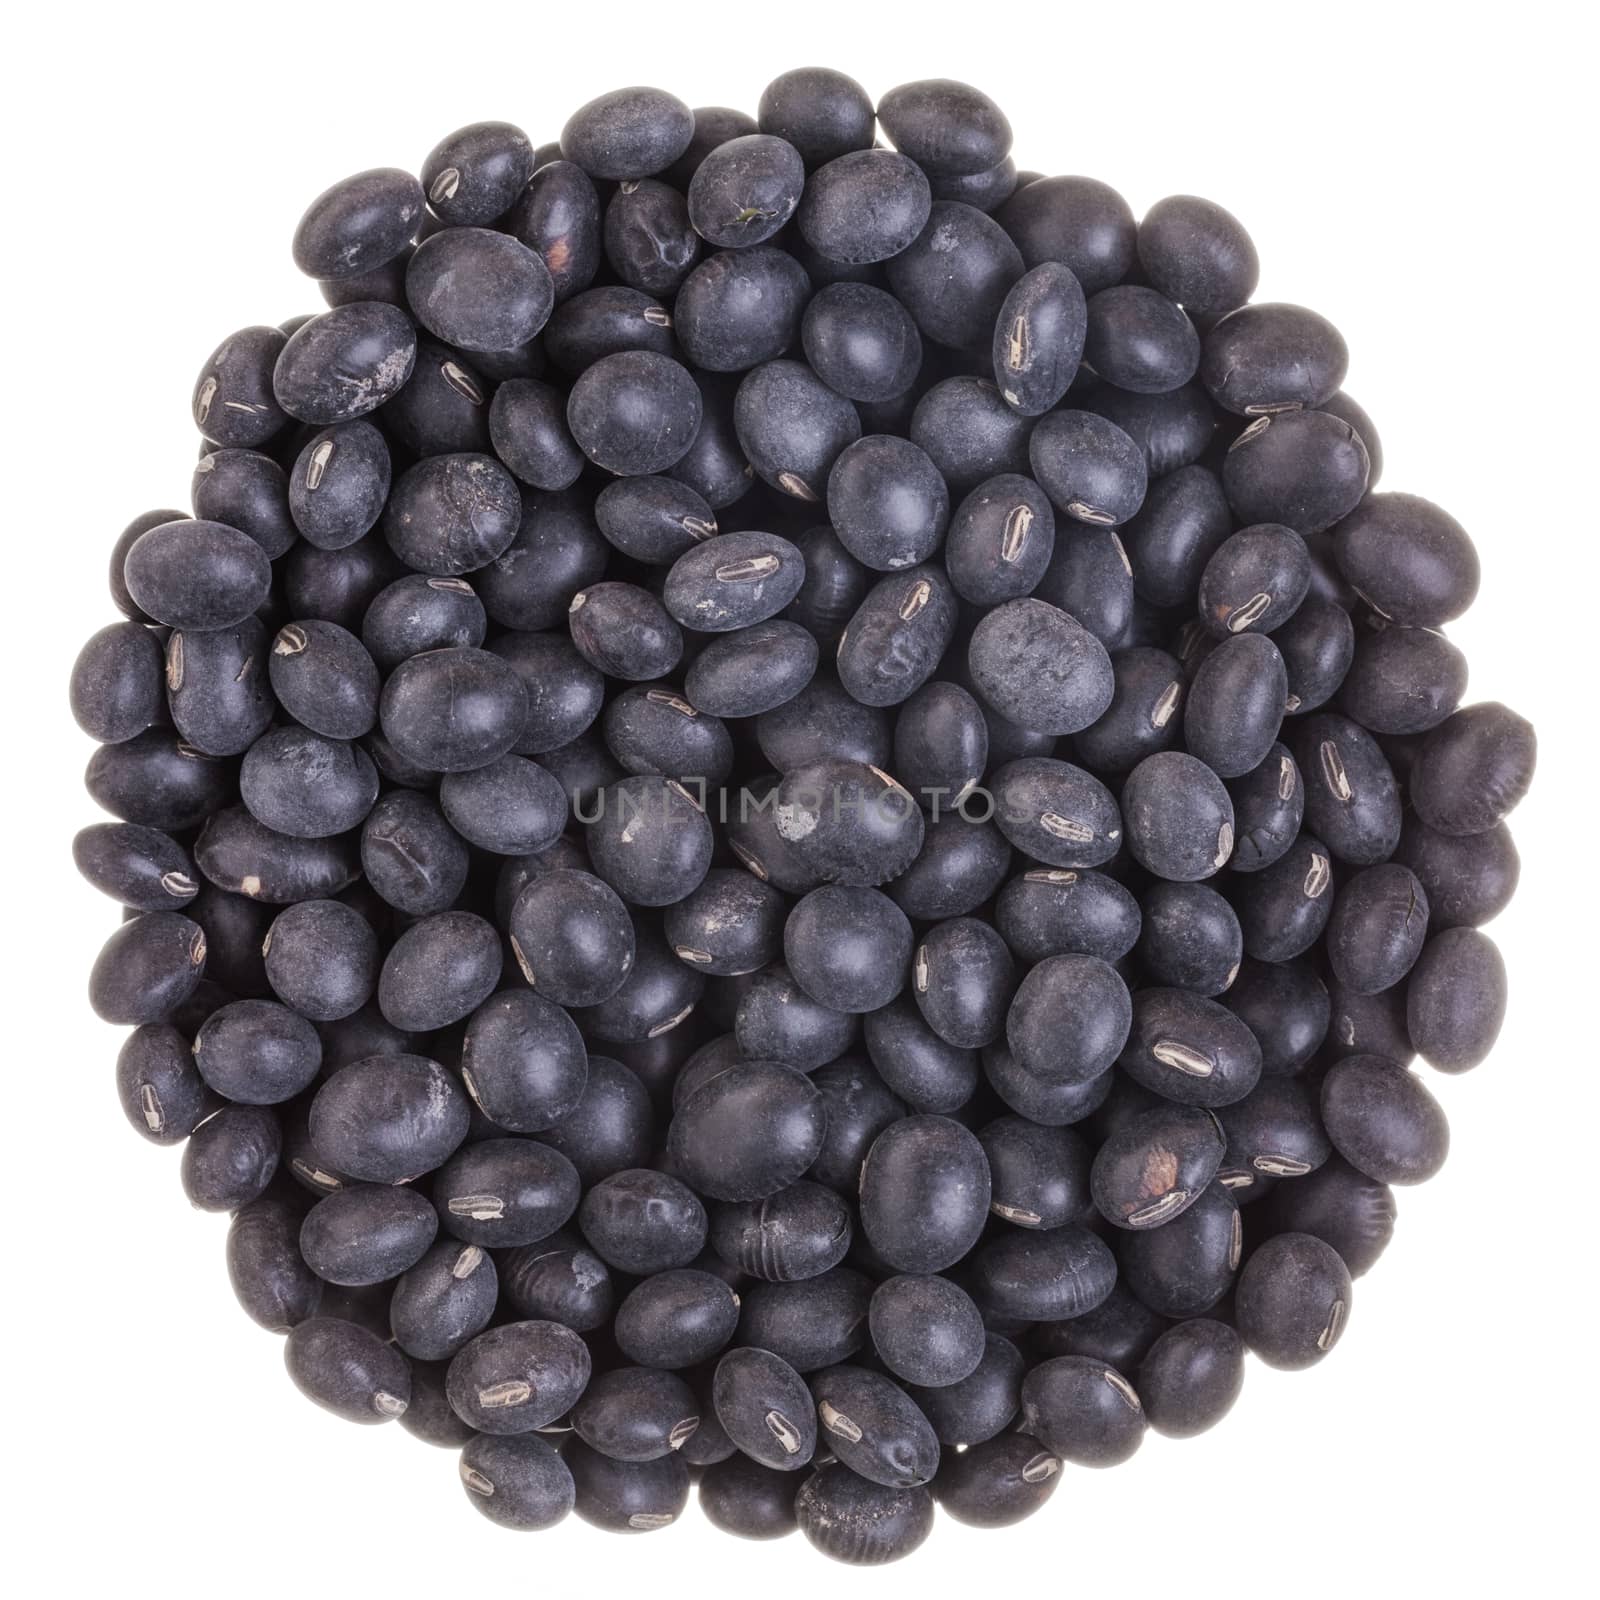 Circle Texture of Black Soy Beans by aetb